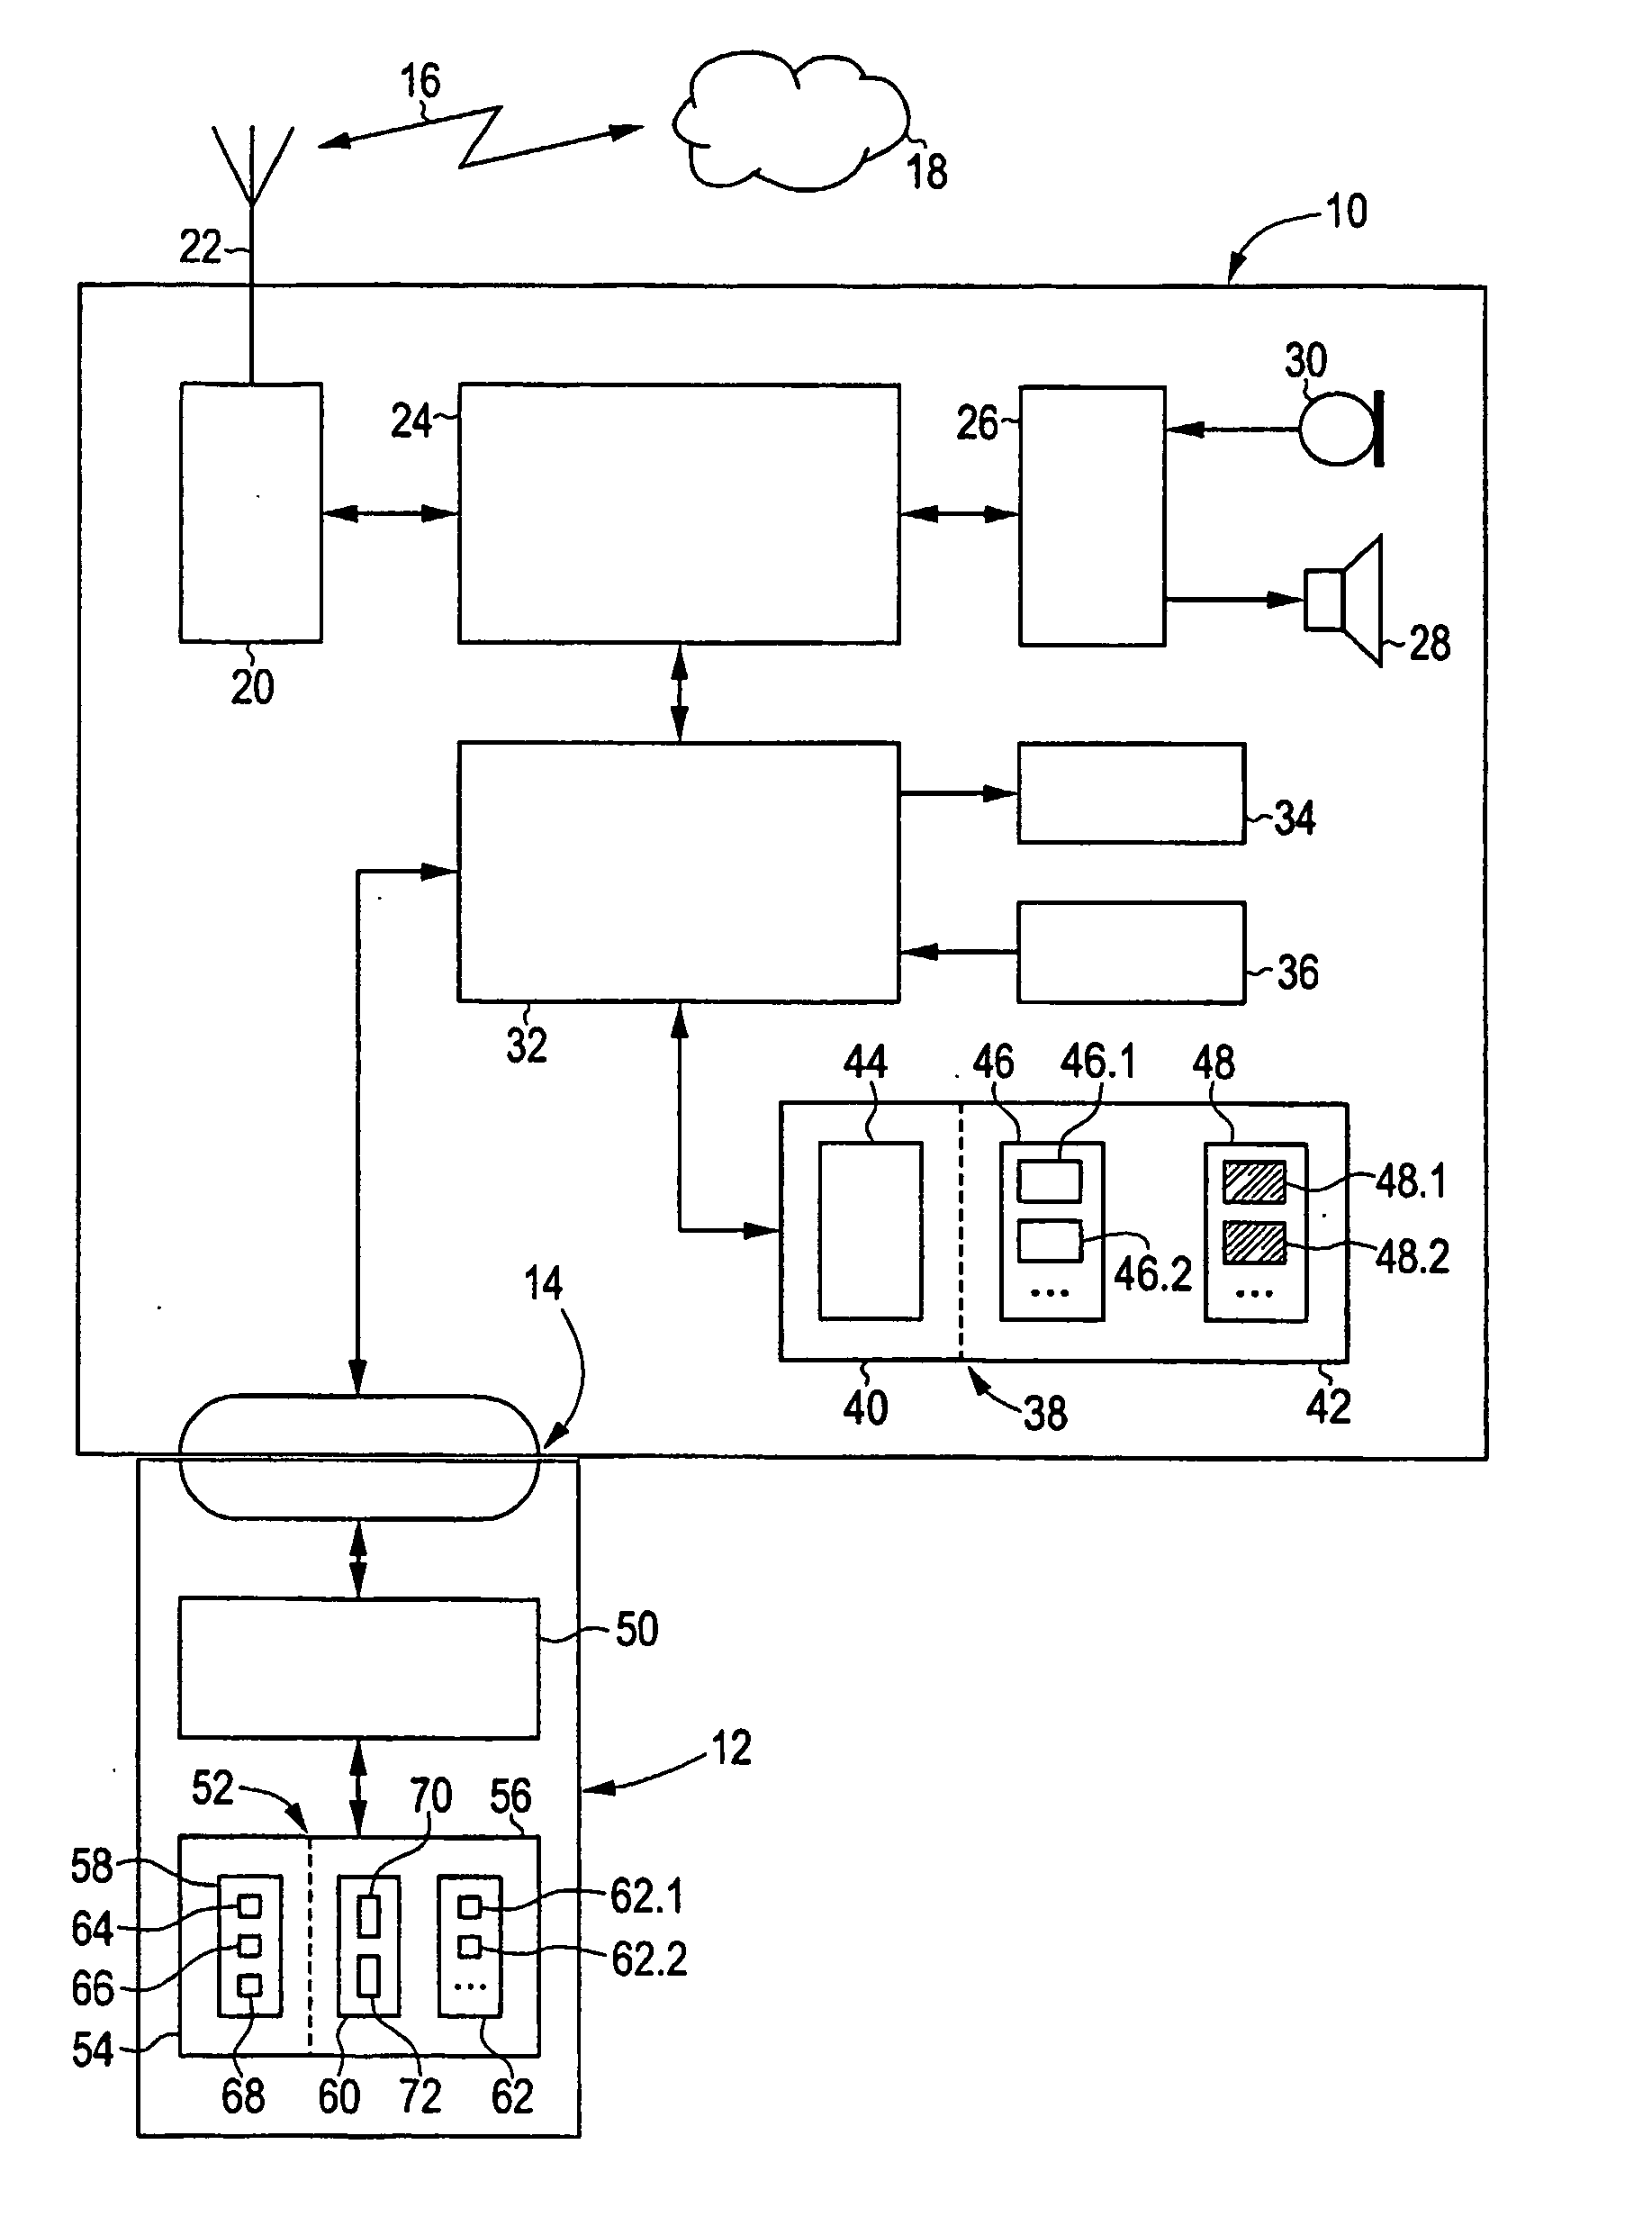 Storing and accessing data in a mobile device and a user module